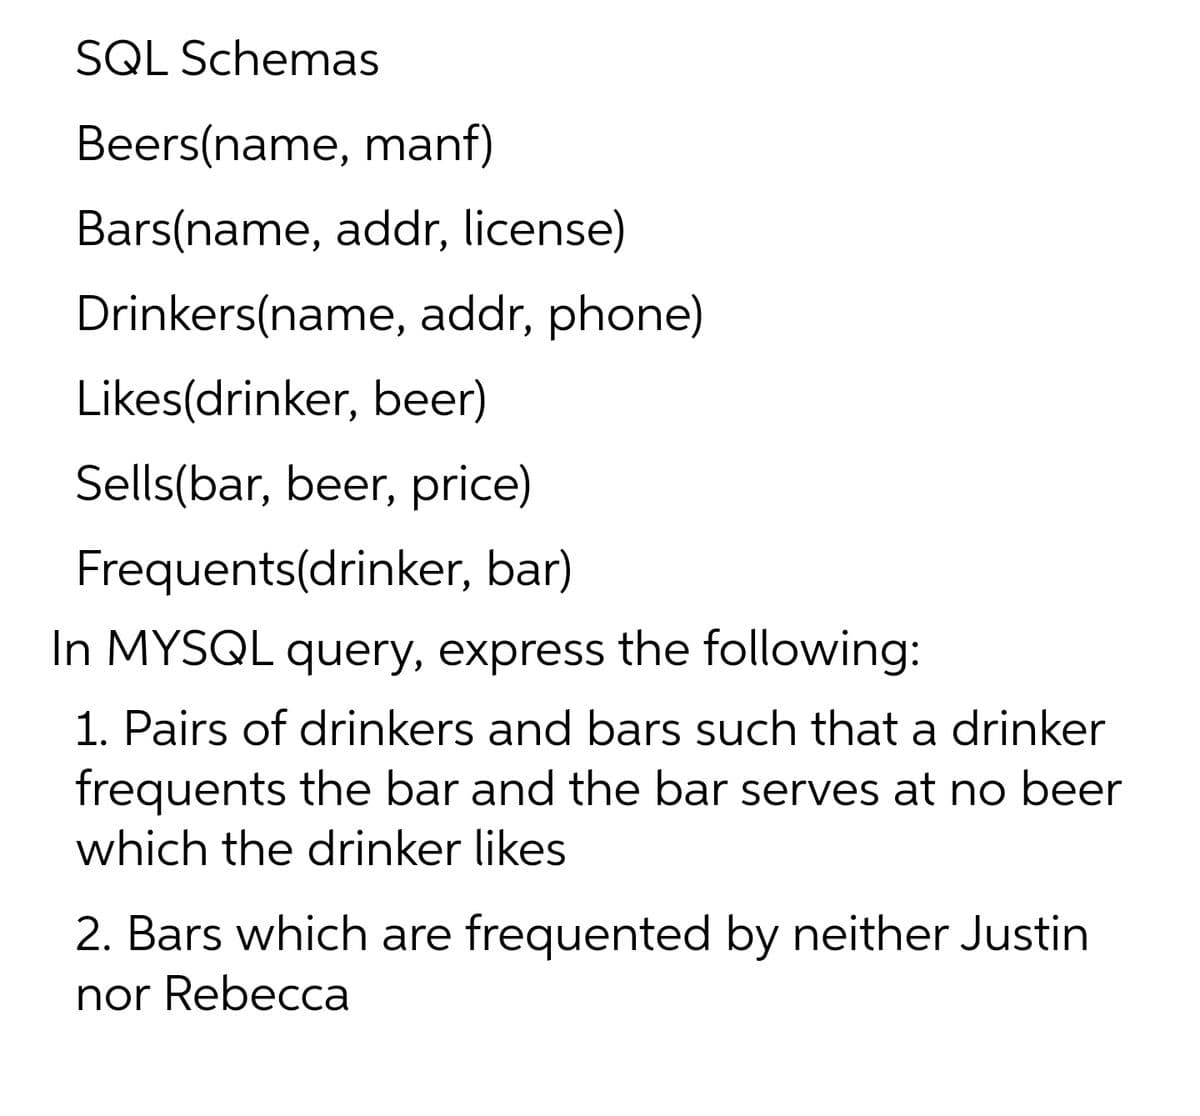 SQL Schemas
Beers(name, manf)
Bars(name, addr, license)
Drinkers(name, addr, phone)
Likes(drinker, beer)
Sells(bar, beer, price)
Frequents(drinker, bar)
In MYSQL query, express the following:
1. Pairs of drinkers and bars such that a drinker
frequents the bar and the bar serves at no beer
which the drinker likes
2. Bars which are frequented by neither Justin
nor Rebecca
